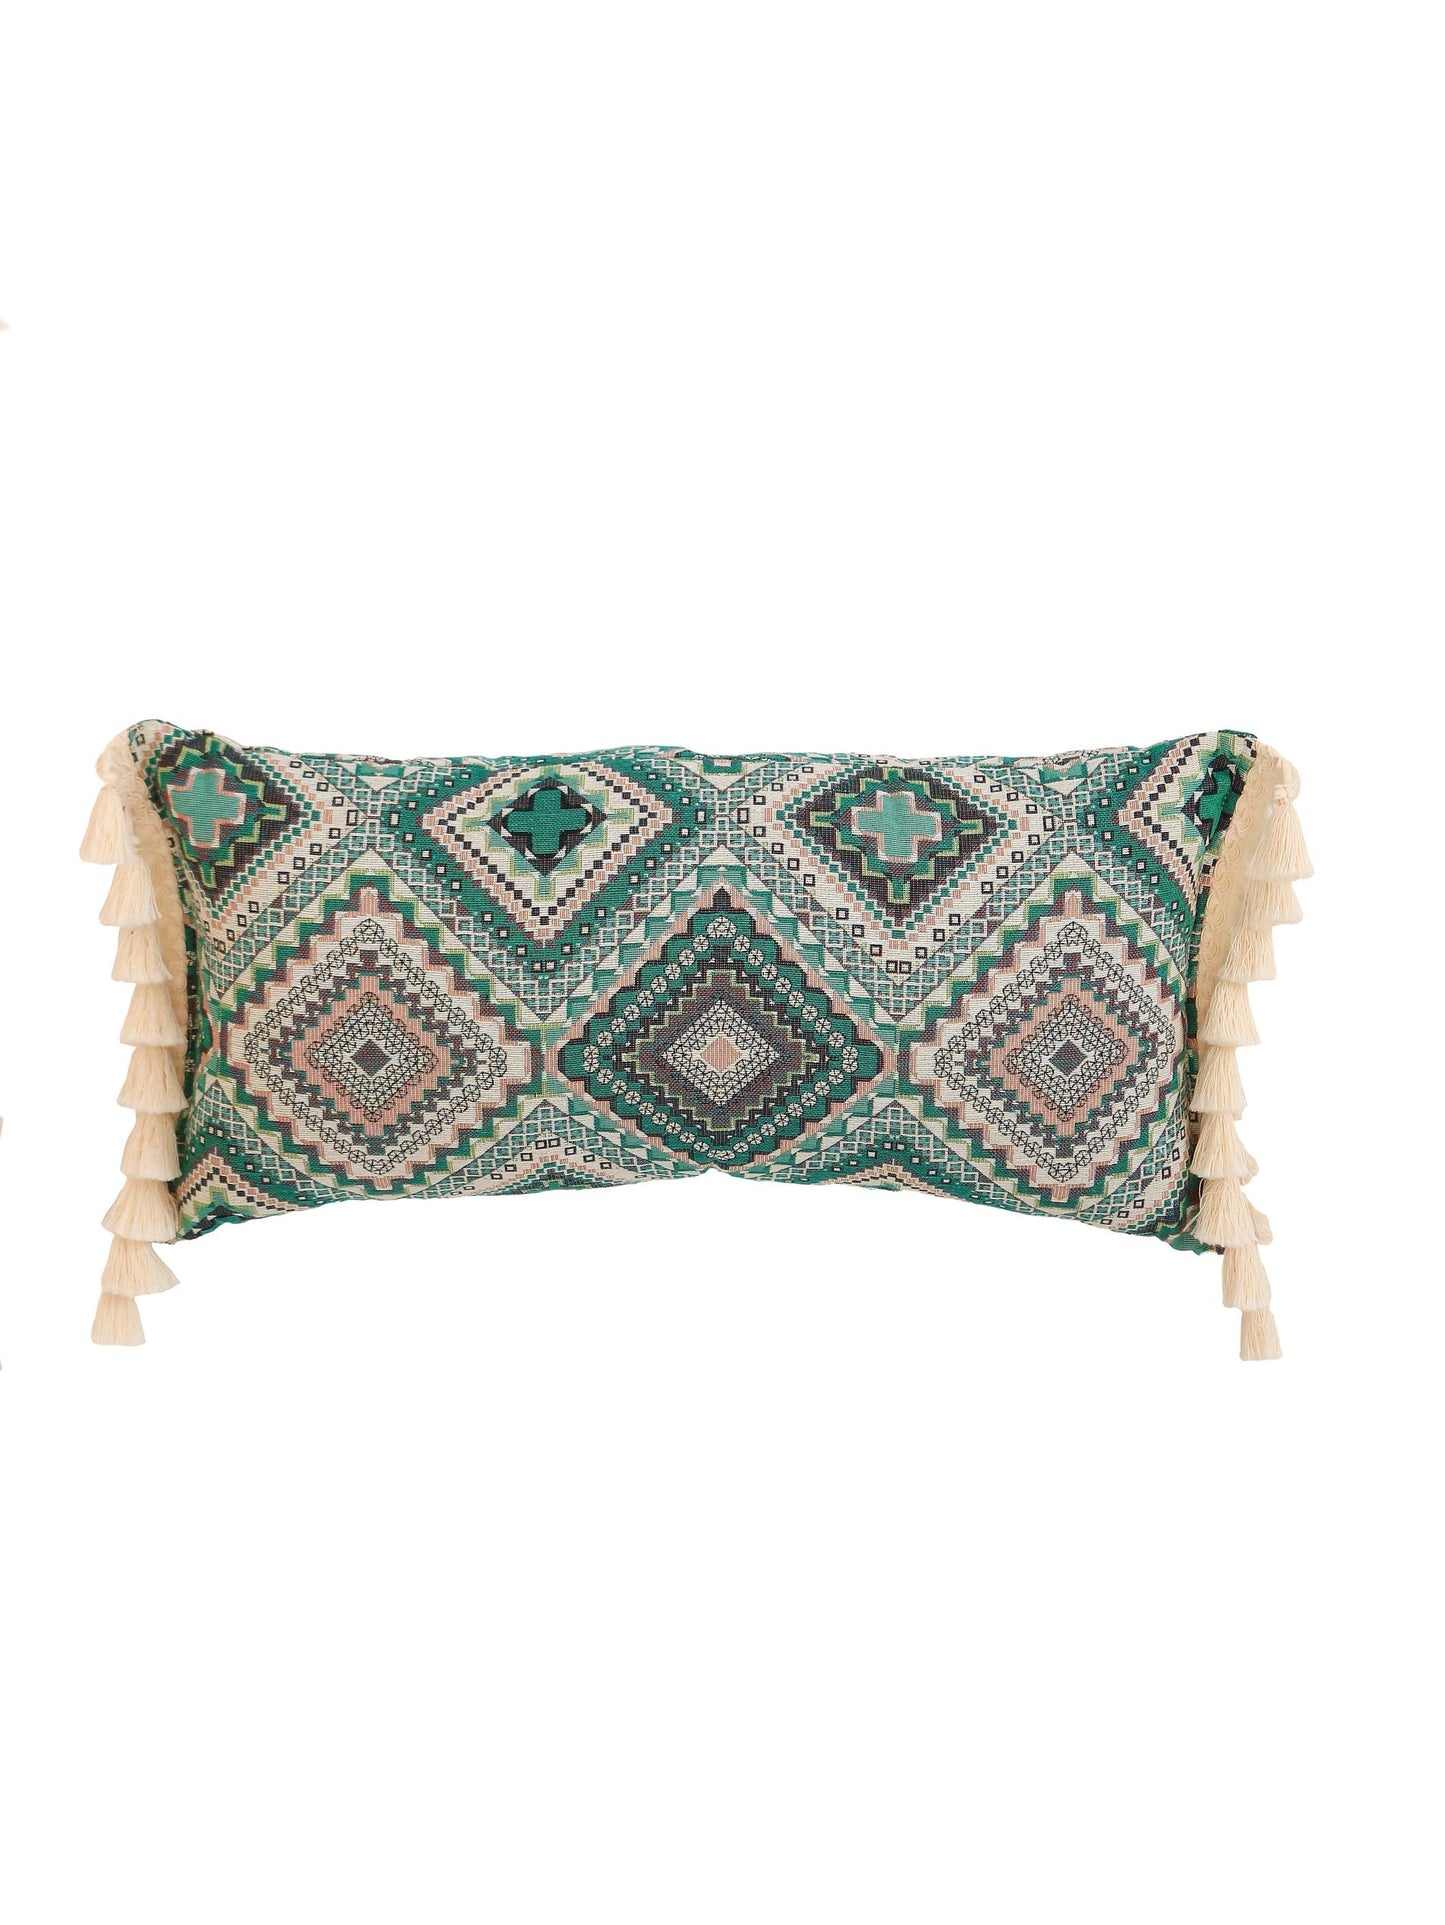 "Sea Green Mosaic" Bolster Pillow with Fringe